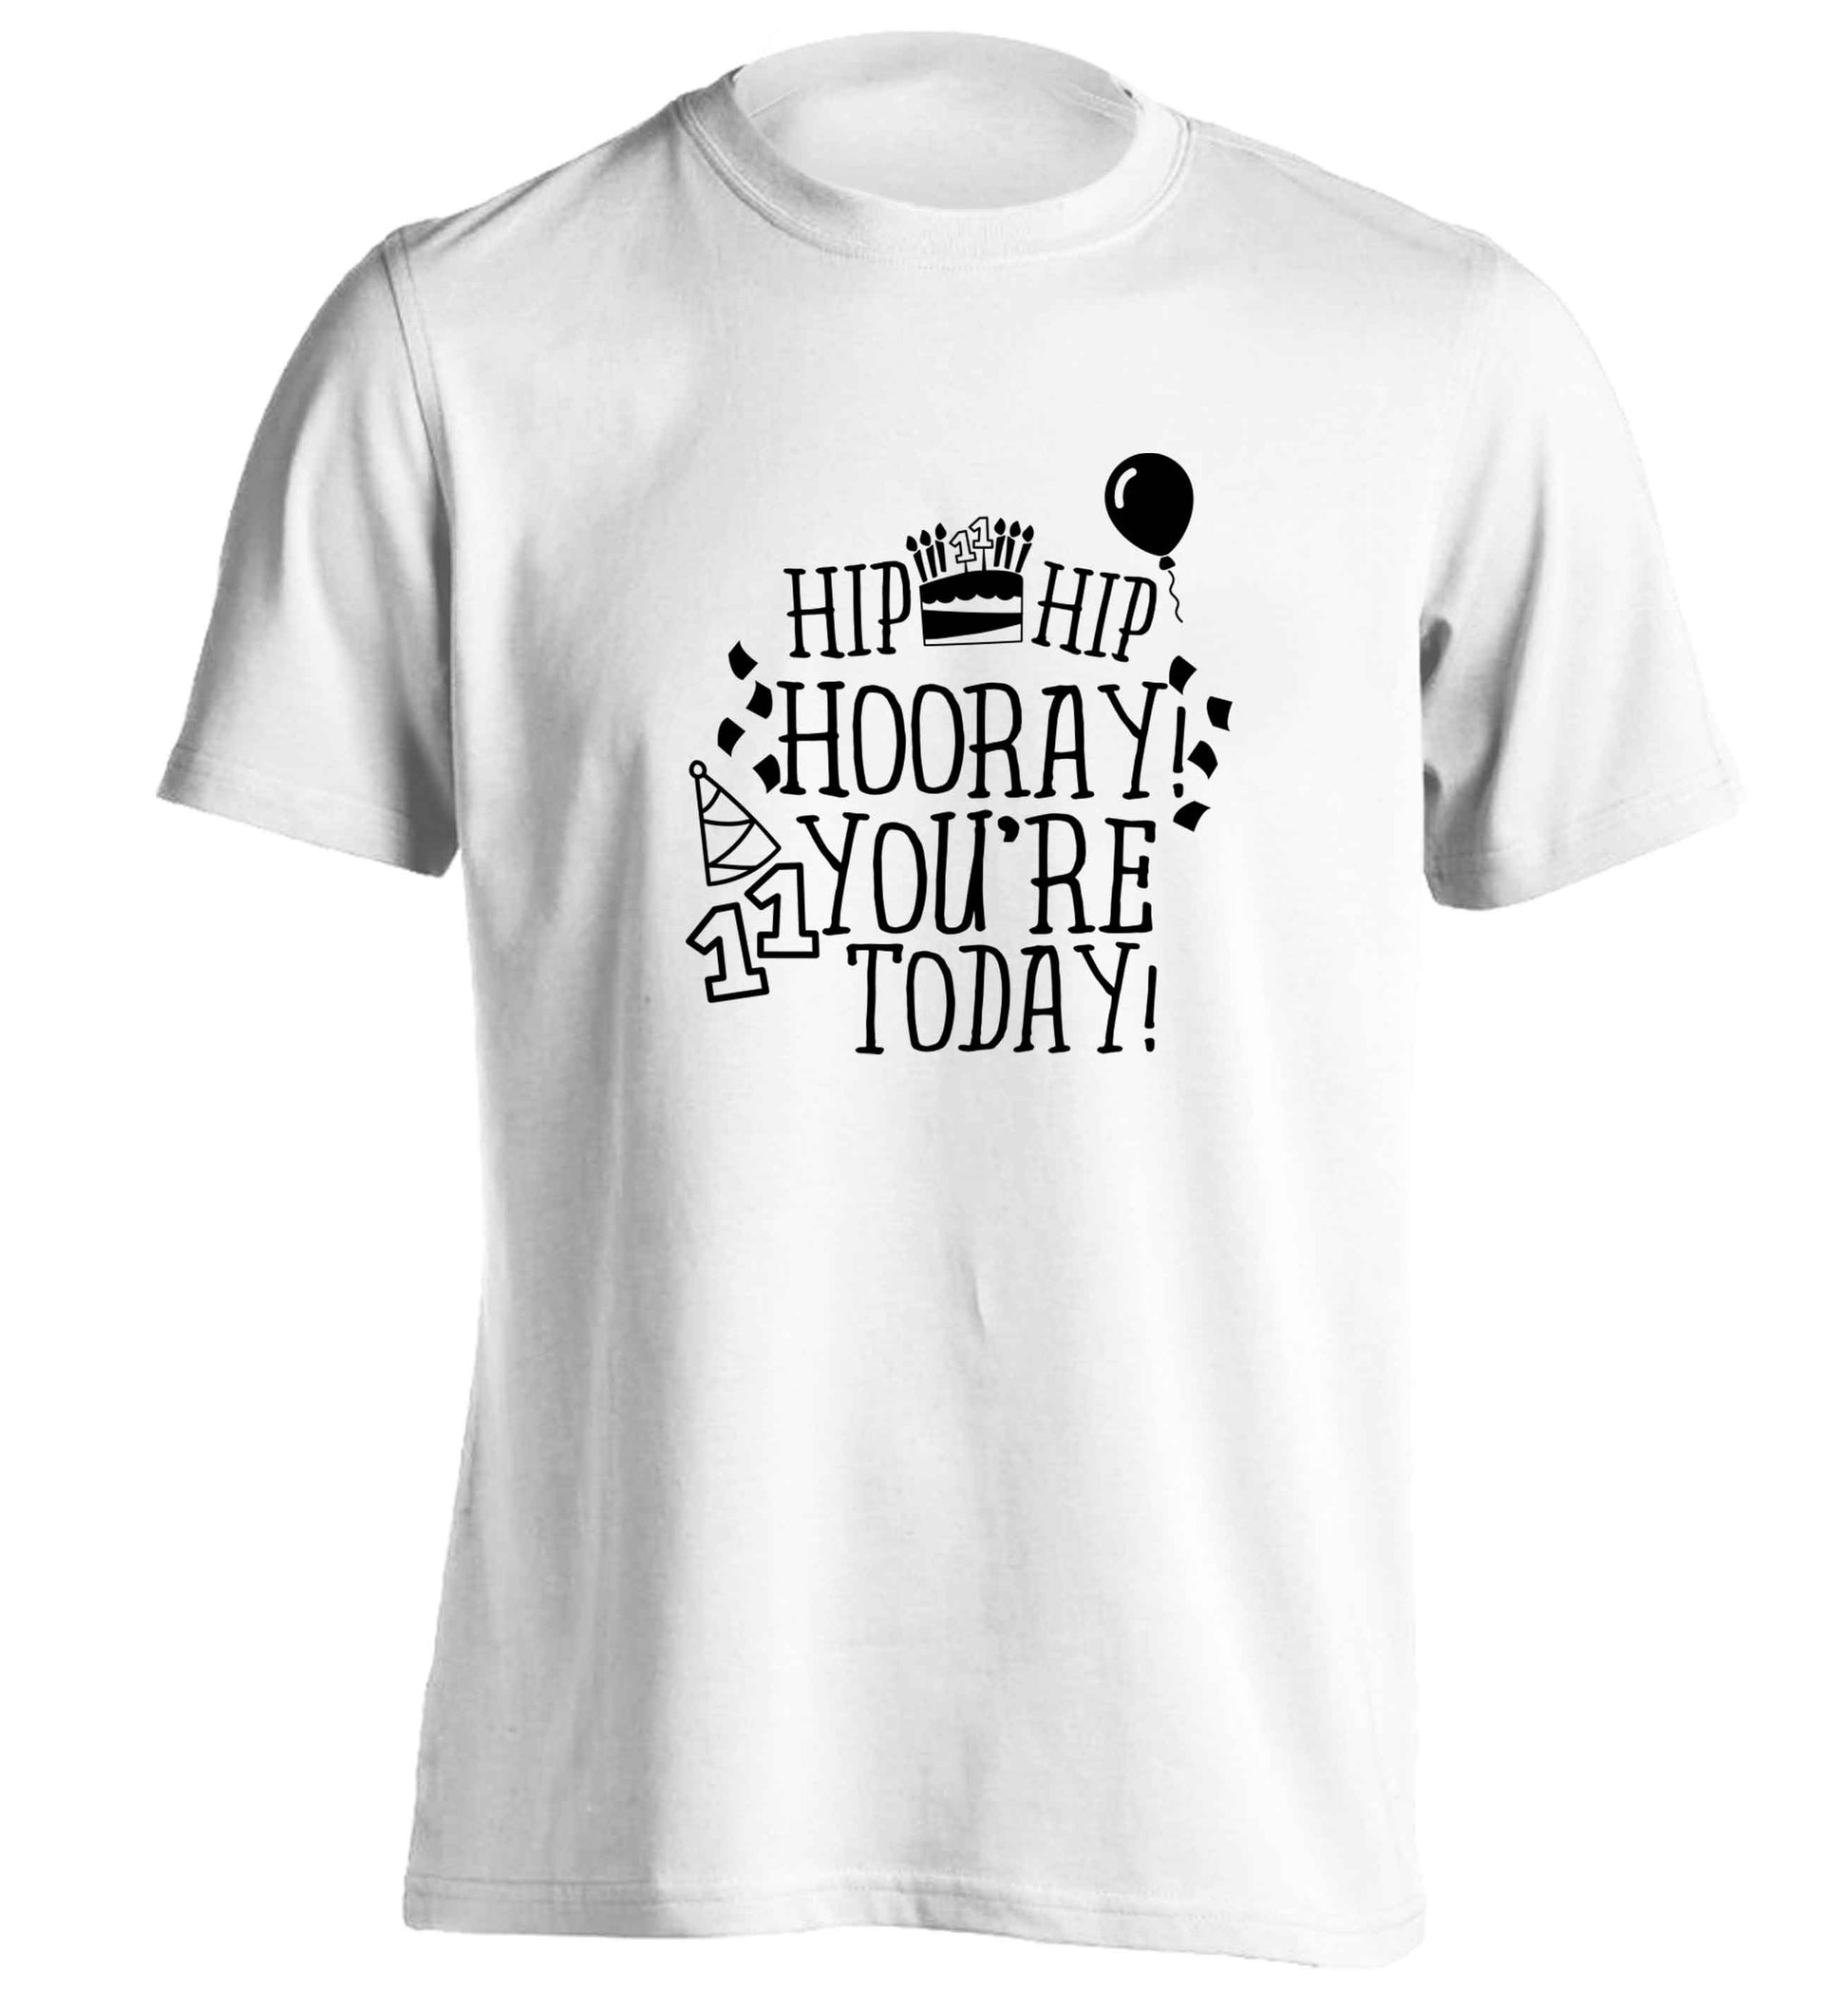 Hip hip hooray I you're eleven today! adults unisex white Tshirt 2XL